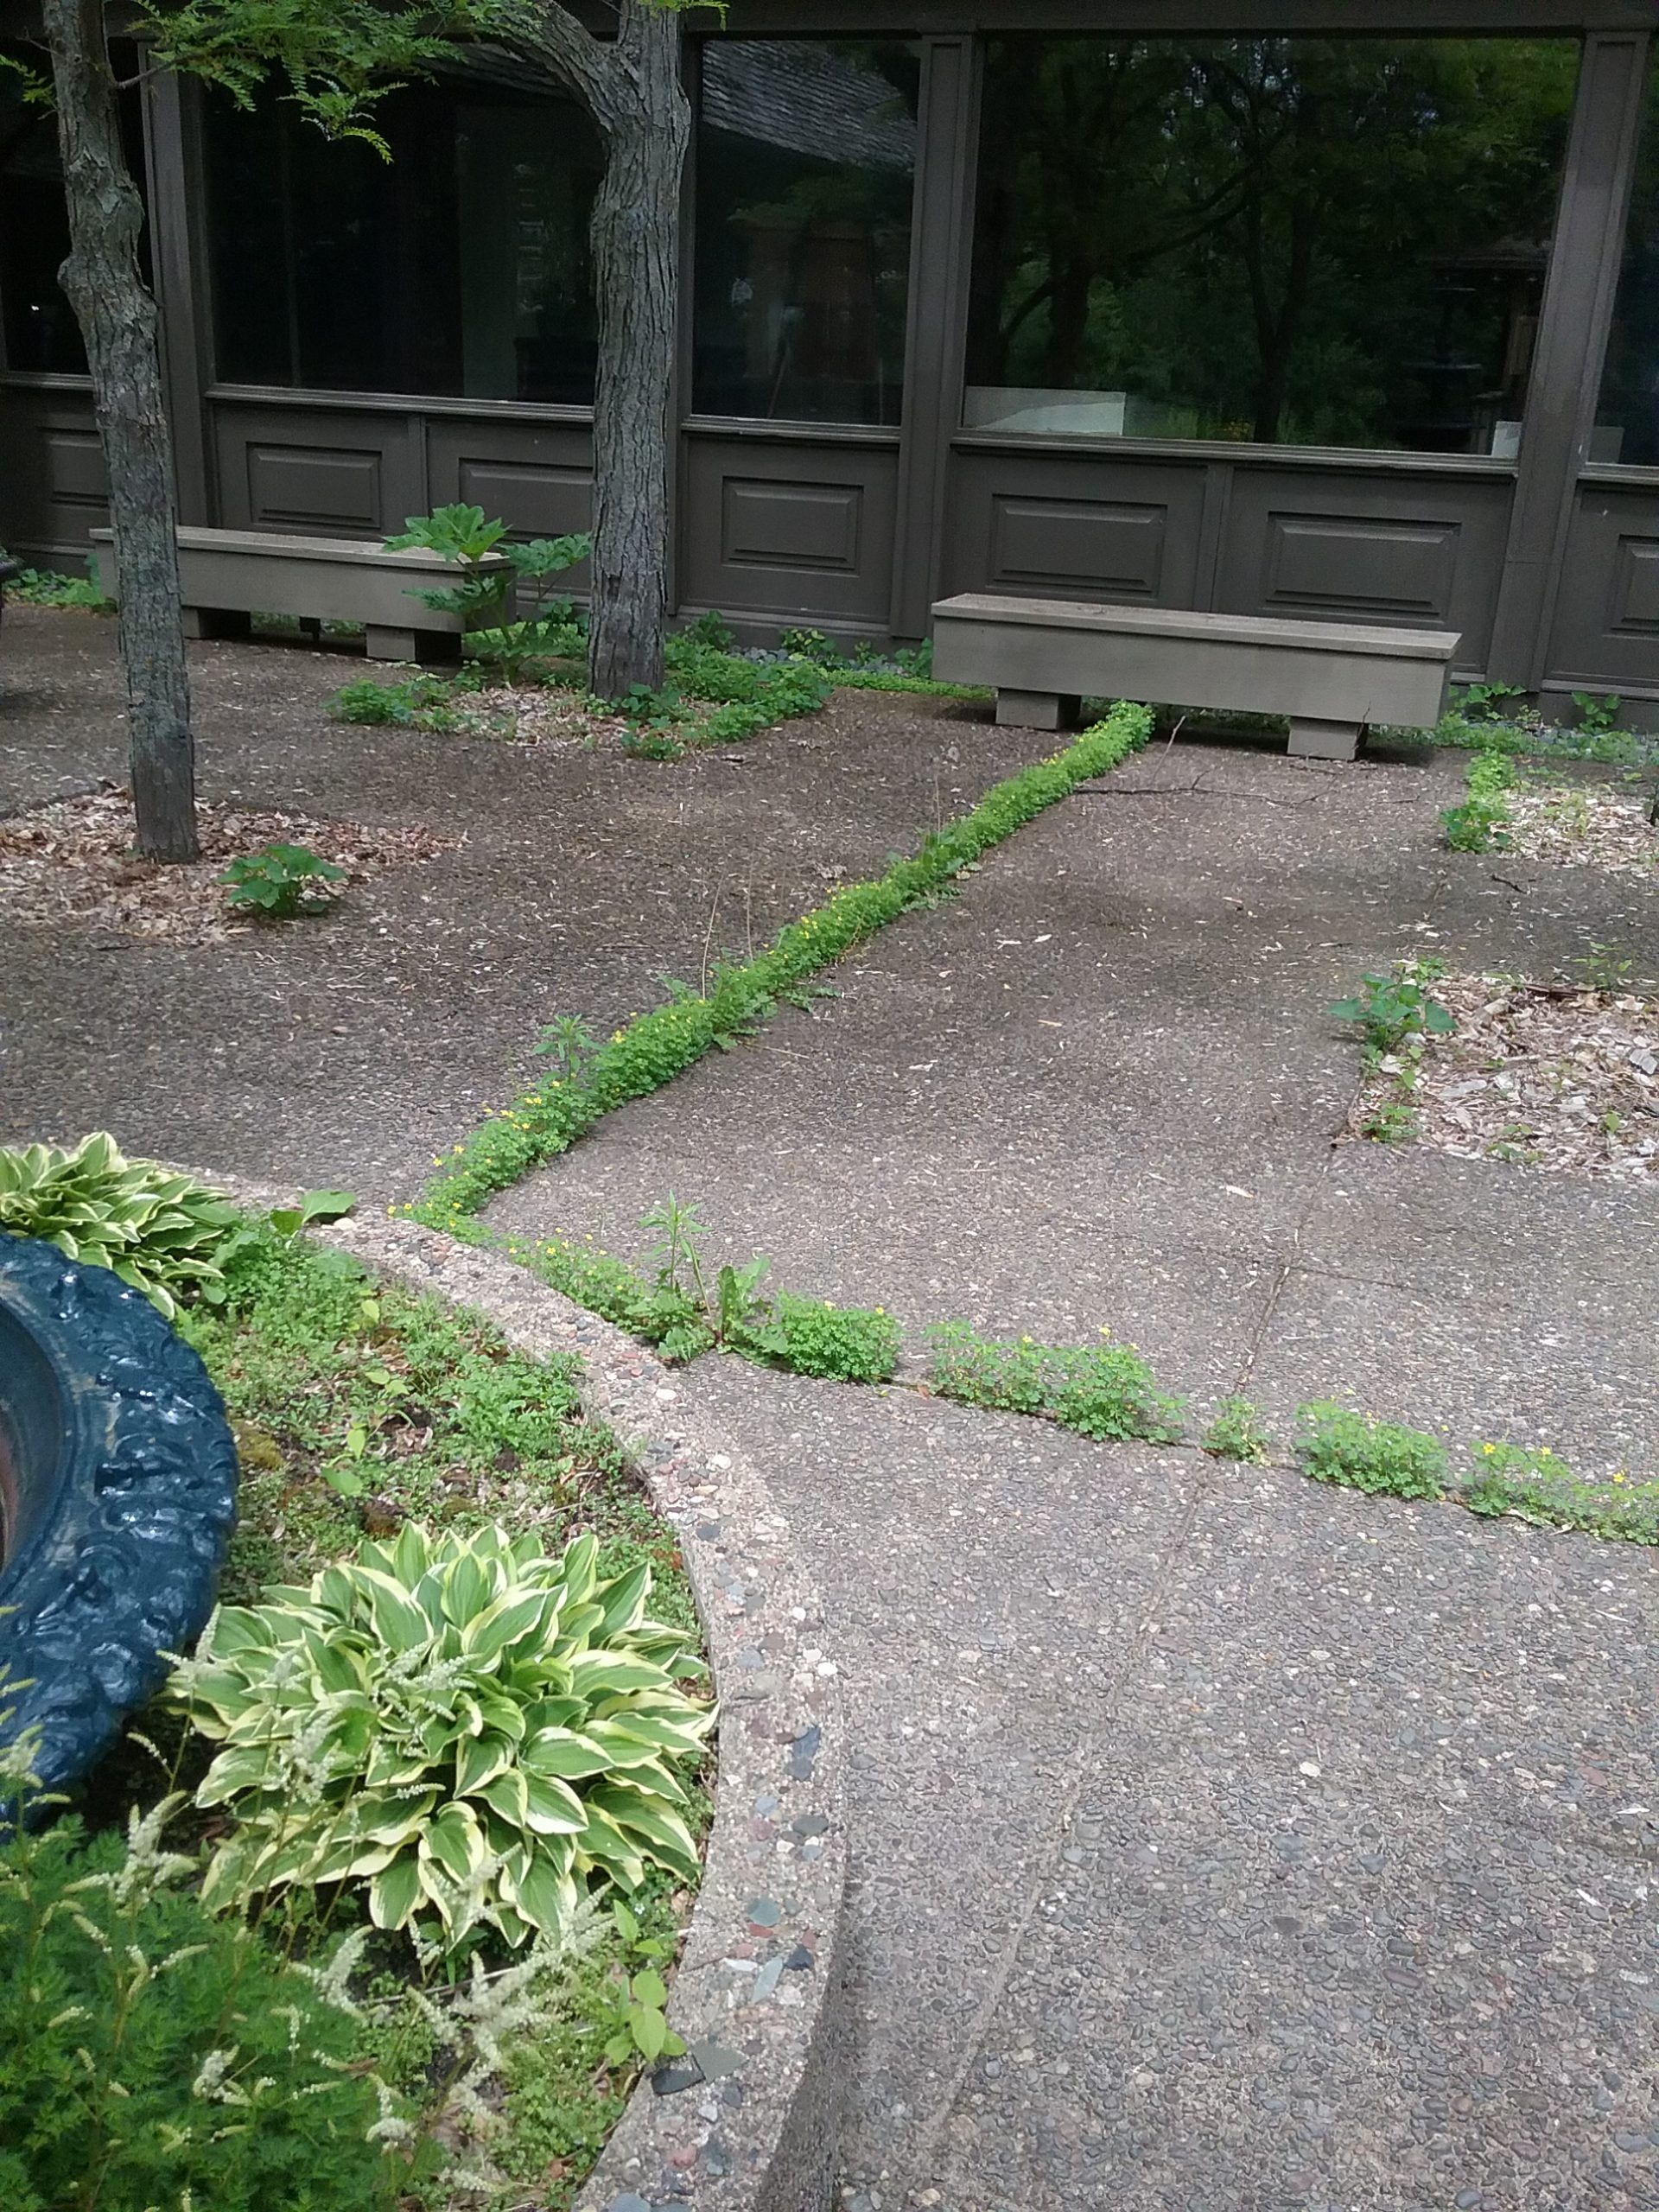 Plants quickly spring up in the cracks of the courtyard pavers at The Charles A. Weyerhaeuser Memorial Museum. Nature is not concerned with whether we have a building to maintain, however, preservation efforts need to take into account both the environment and structures. June 2019.